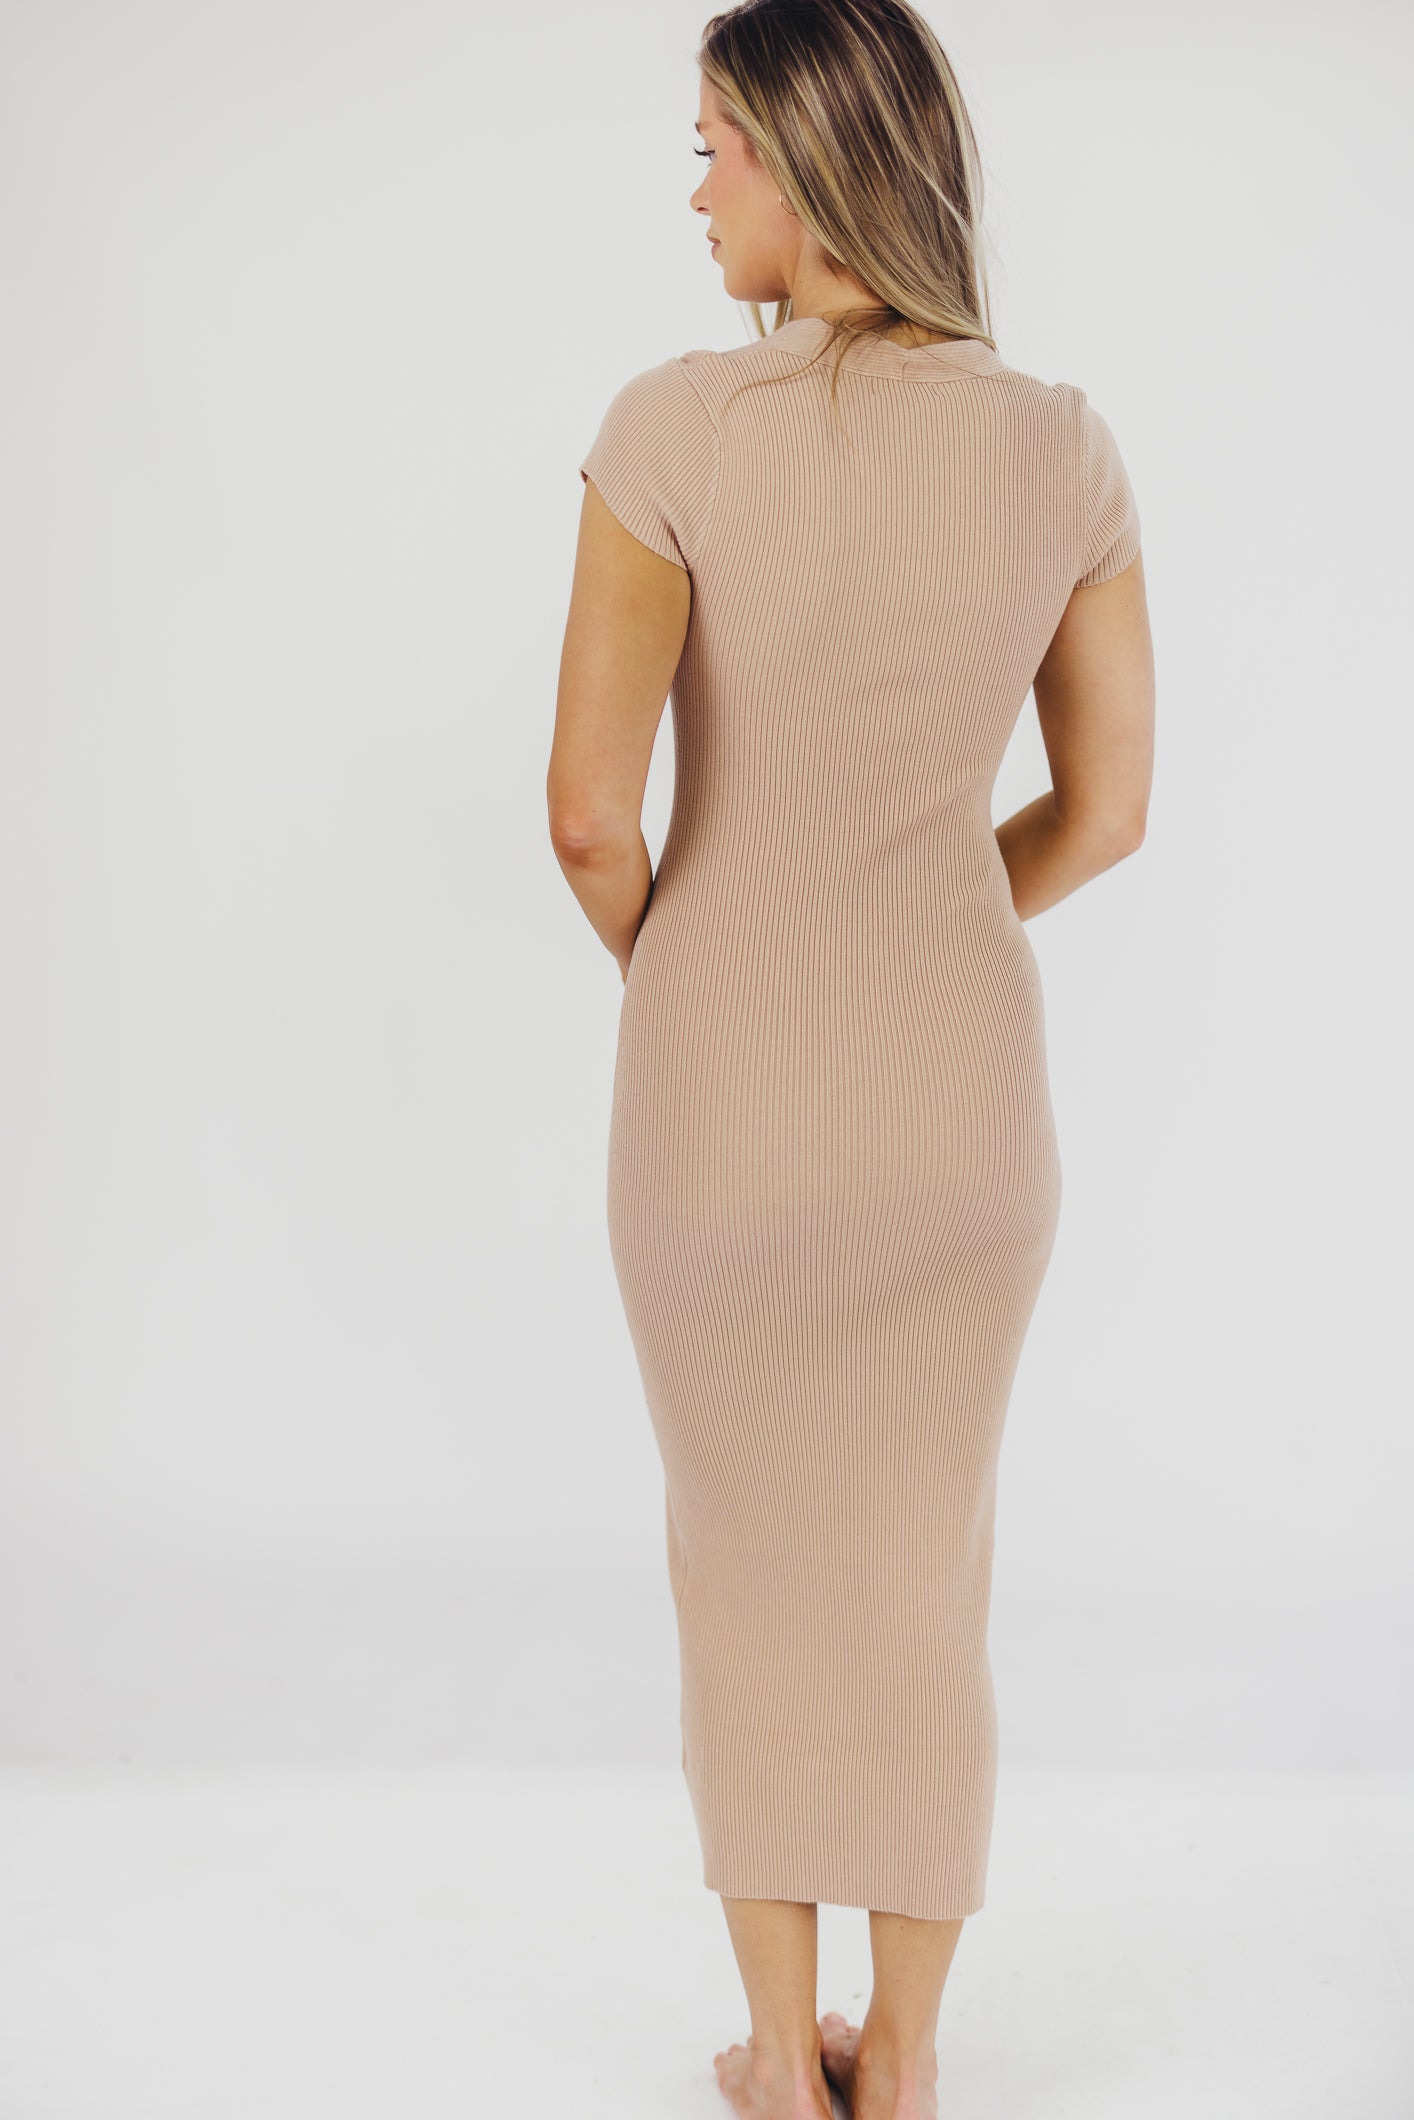 Wren Ribbed Knit Maxi Dress with Square Neckline in Dusty Blush (XS-XL) - Worth Collective Exclusive